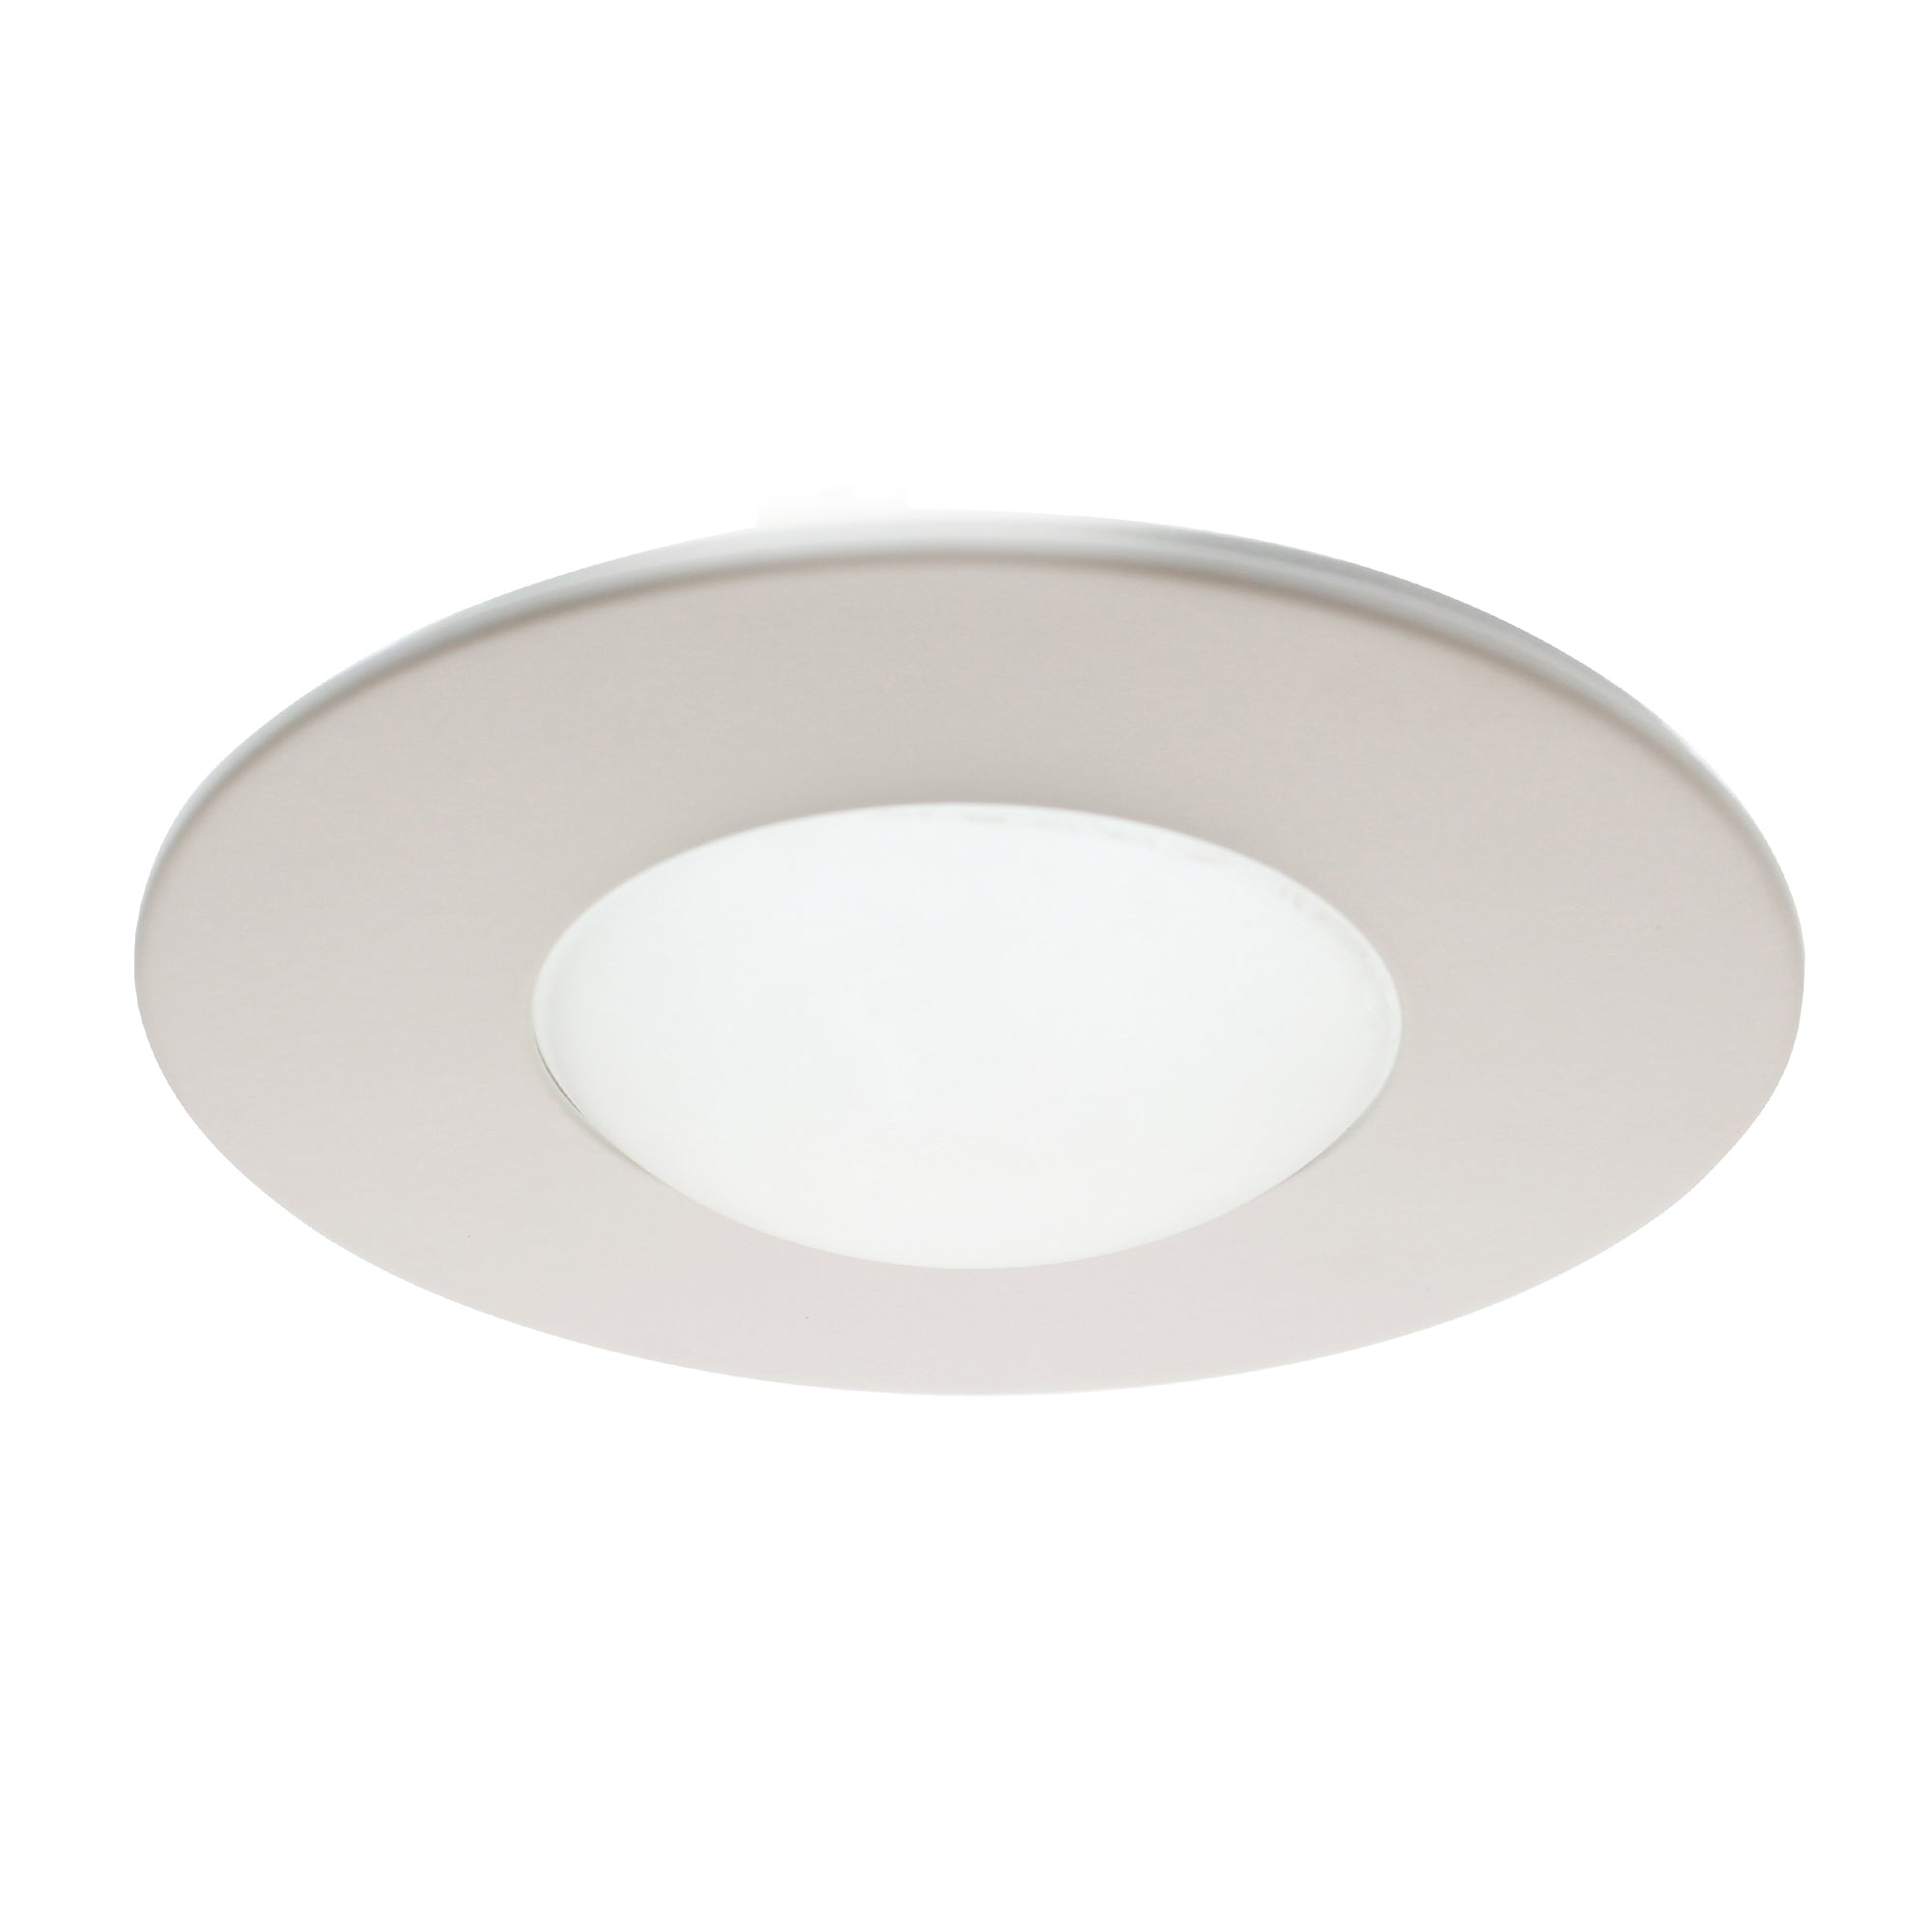 Elco Lighting, ELCO LIGHTING EL996W RECESSED SHOWER TRIM WITH ROUND DROP LENS, 4-INCH, WHITE